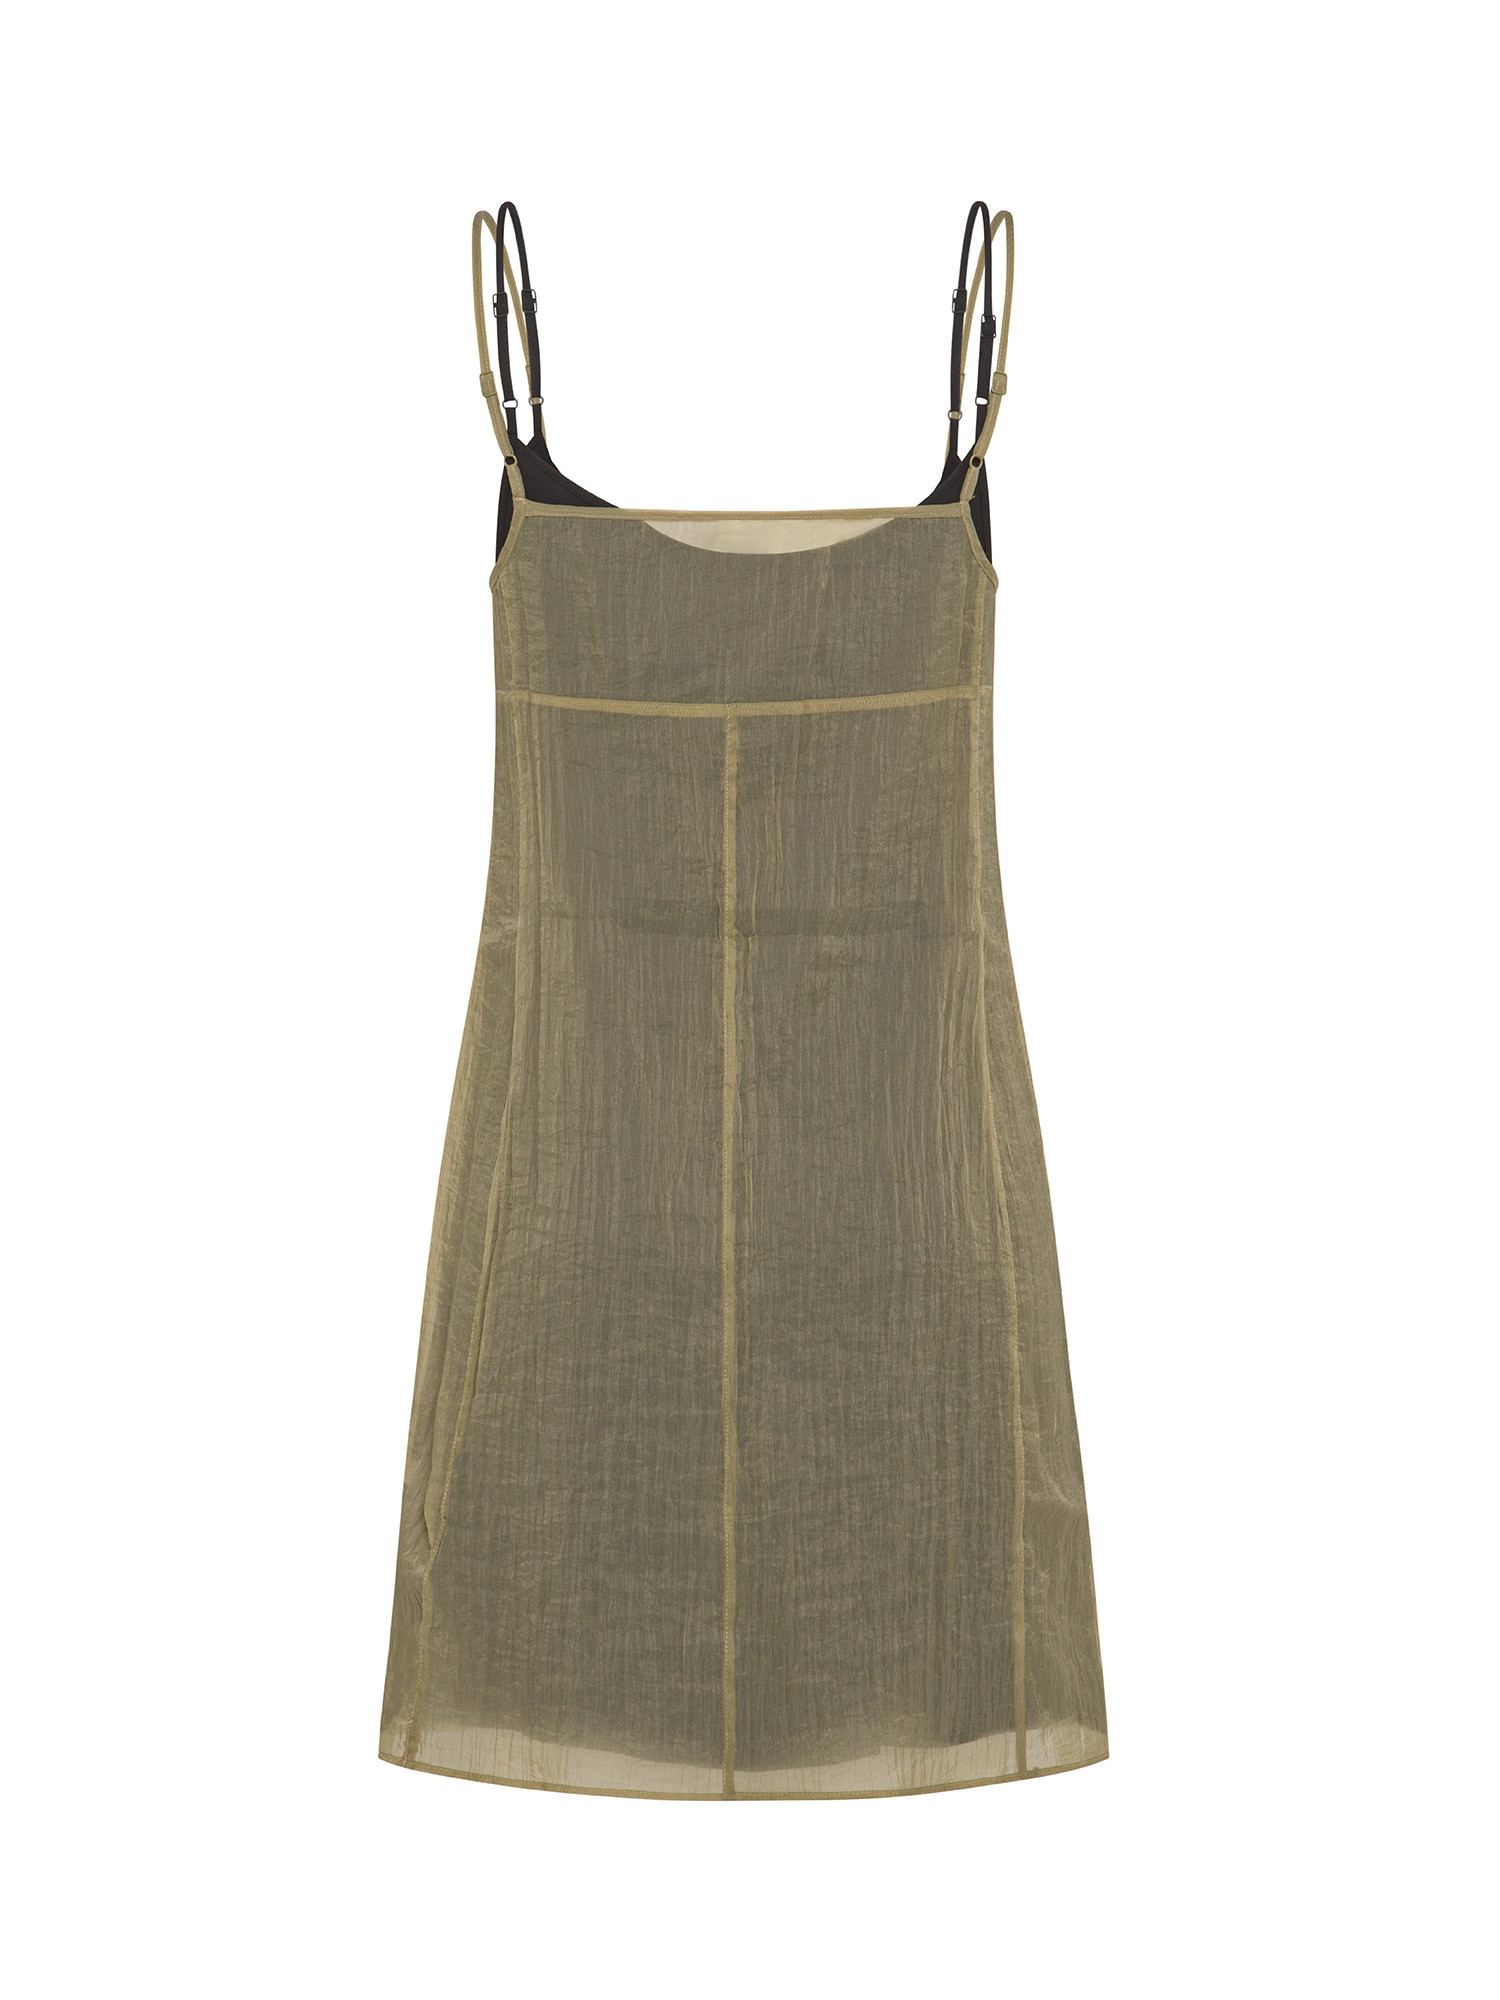 Slip dress doubled in chiffon, Beige, large image number 1